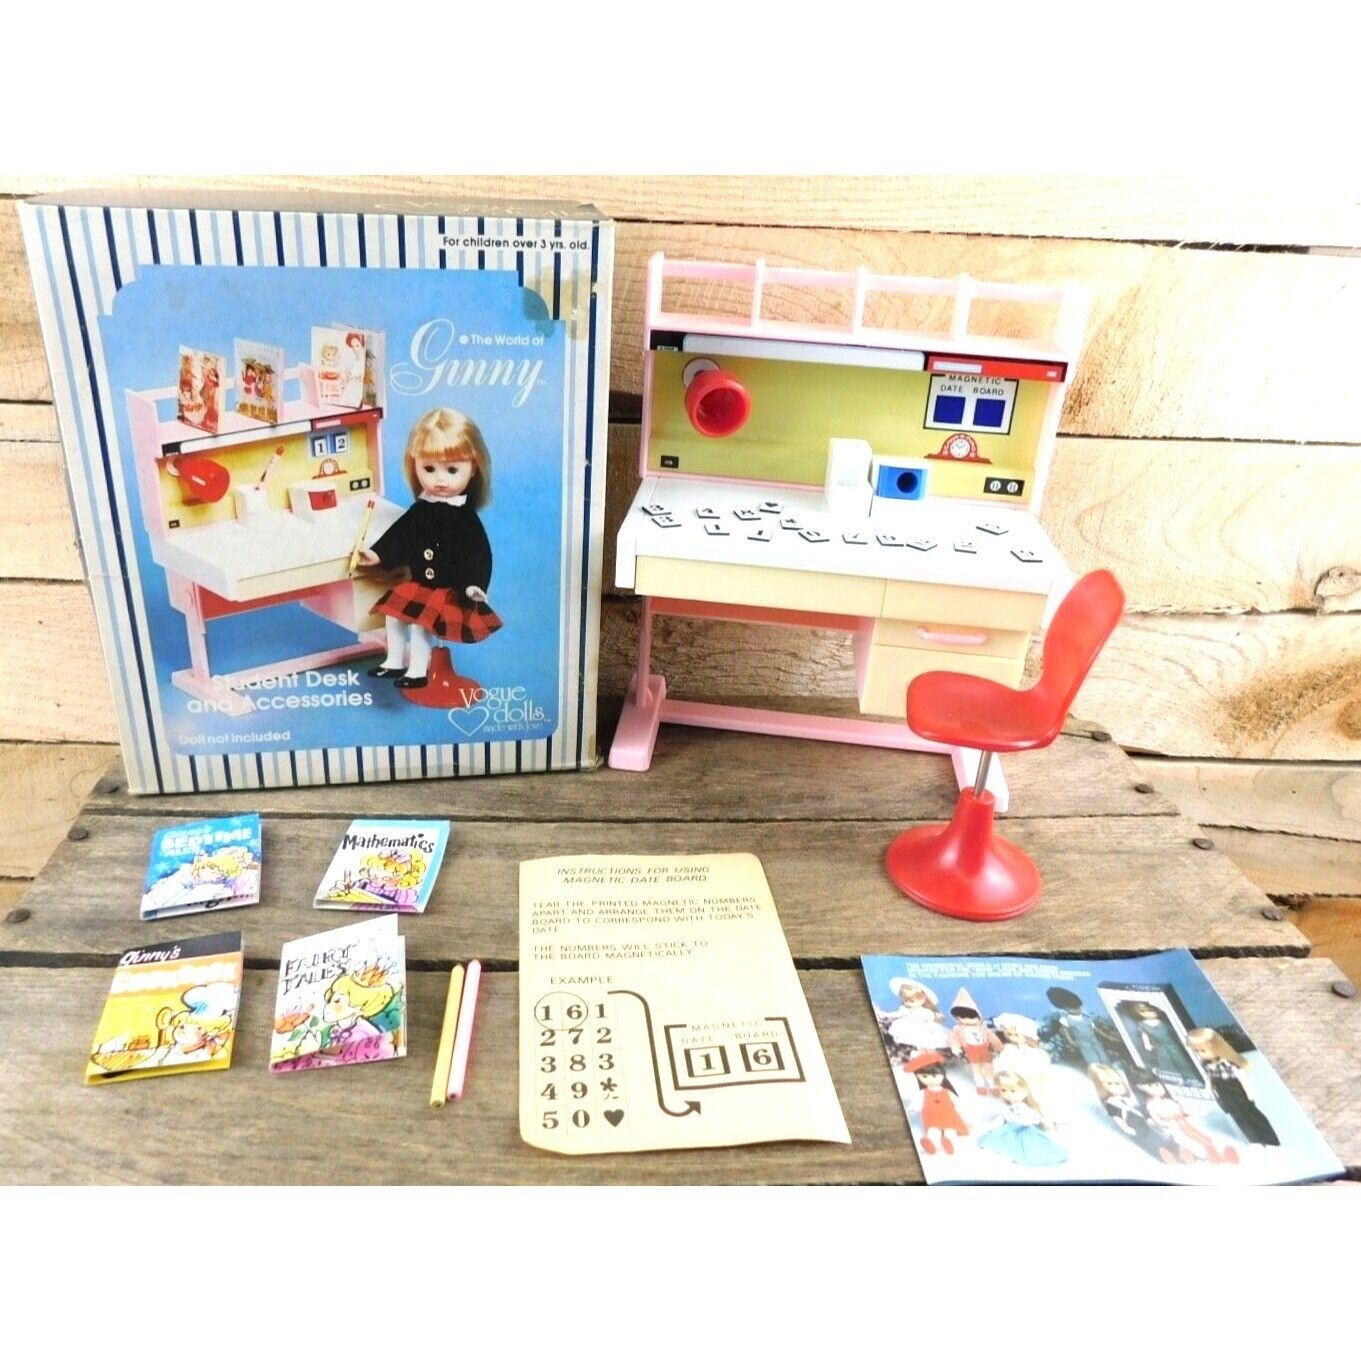 Vogue The World of Ginny Doll Furniture Student Desk and Accessories with Box